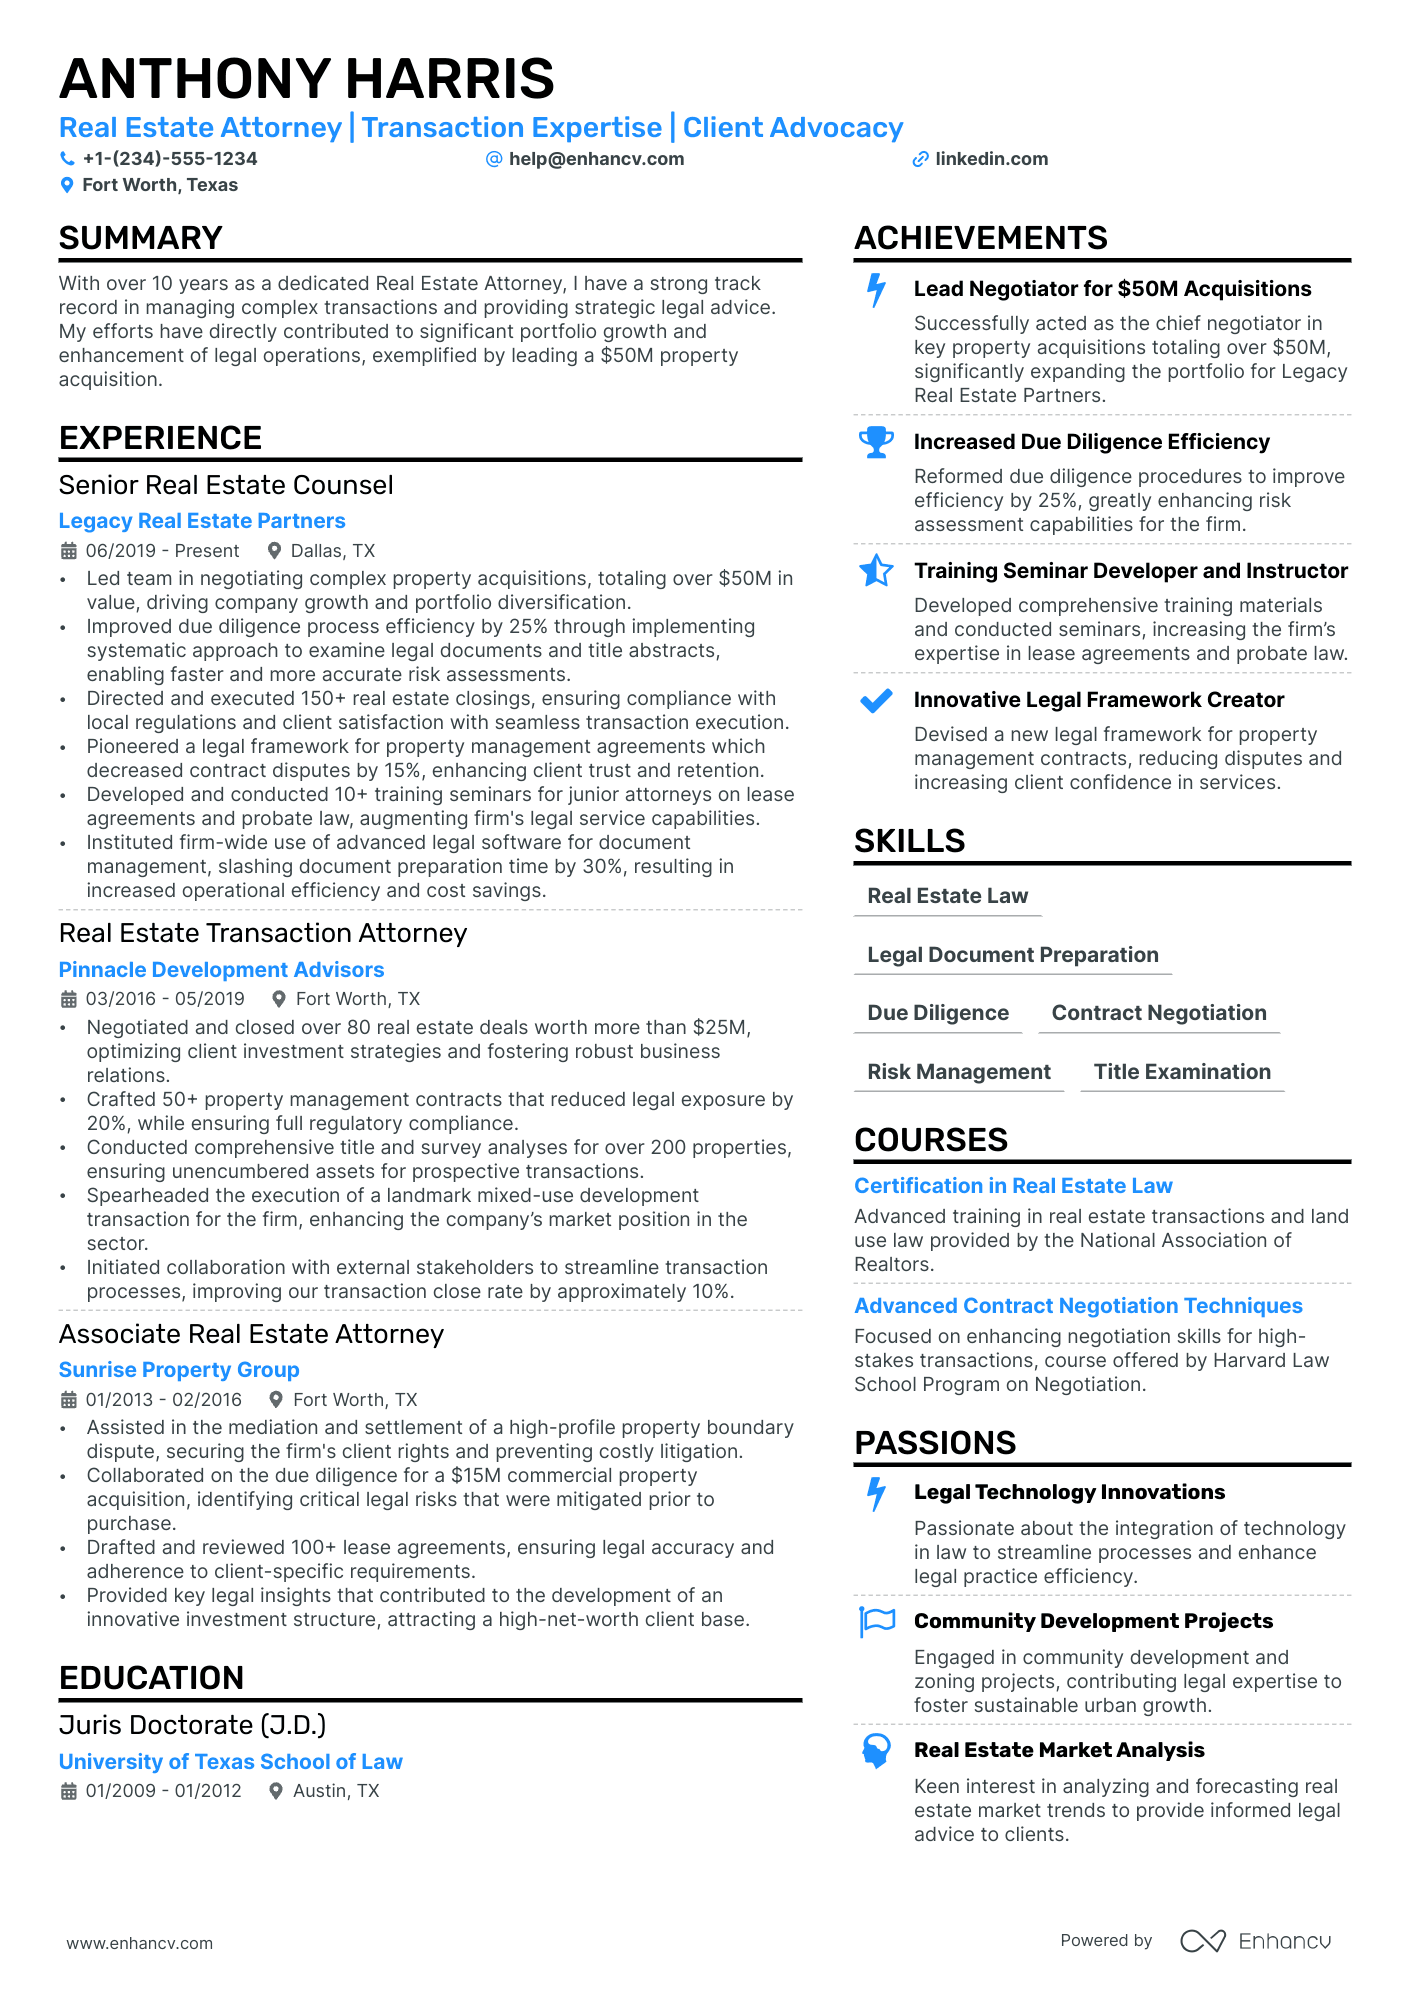 Real Estate Lawyer resume example